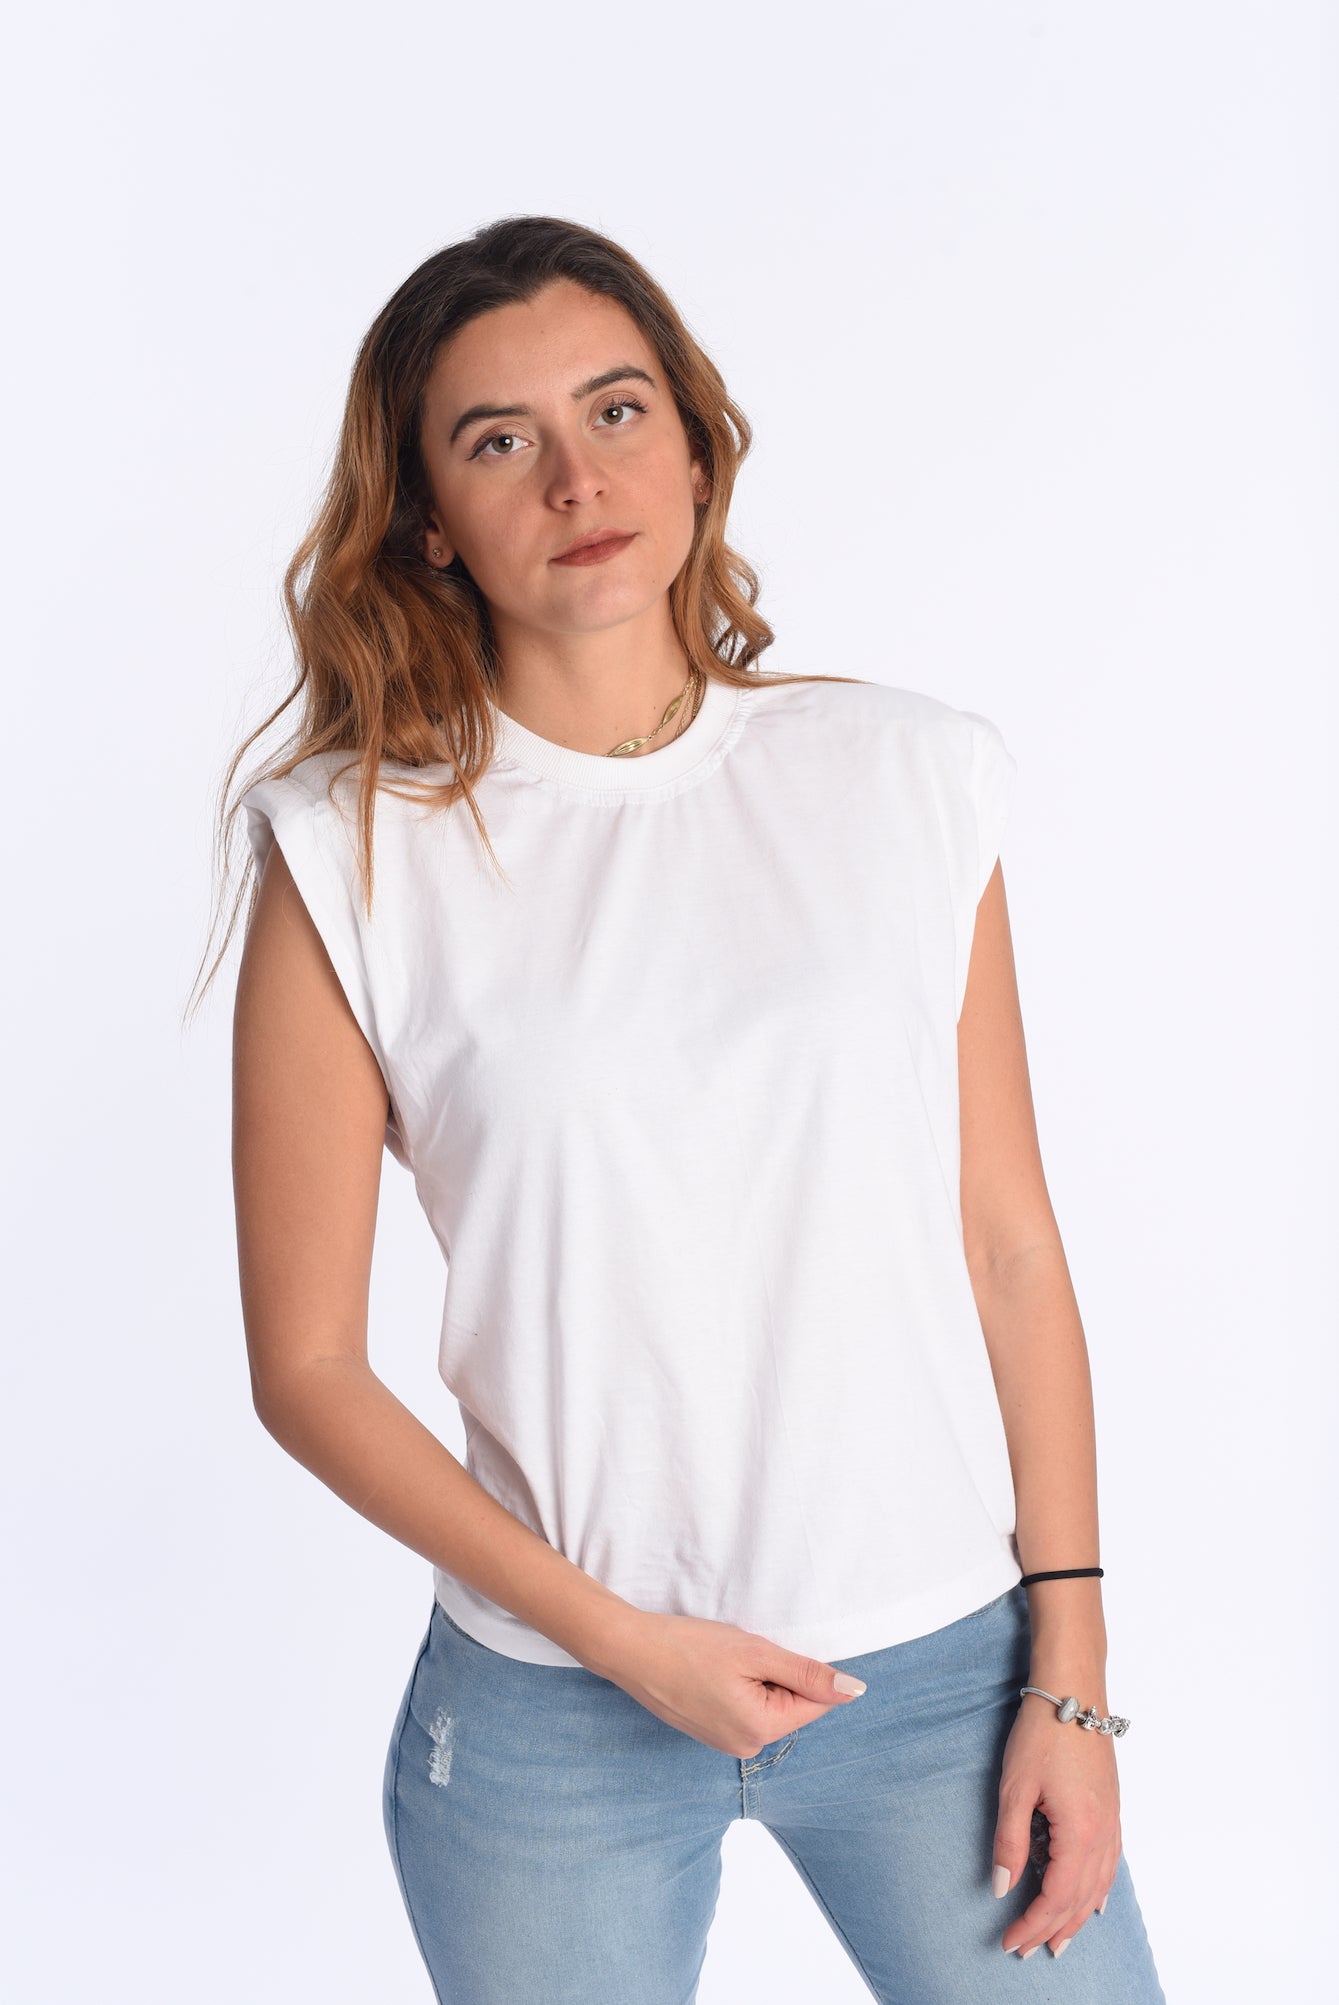 Pad t-shirt in white